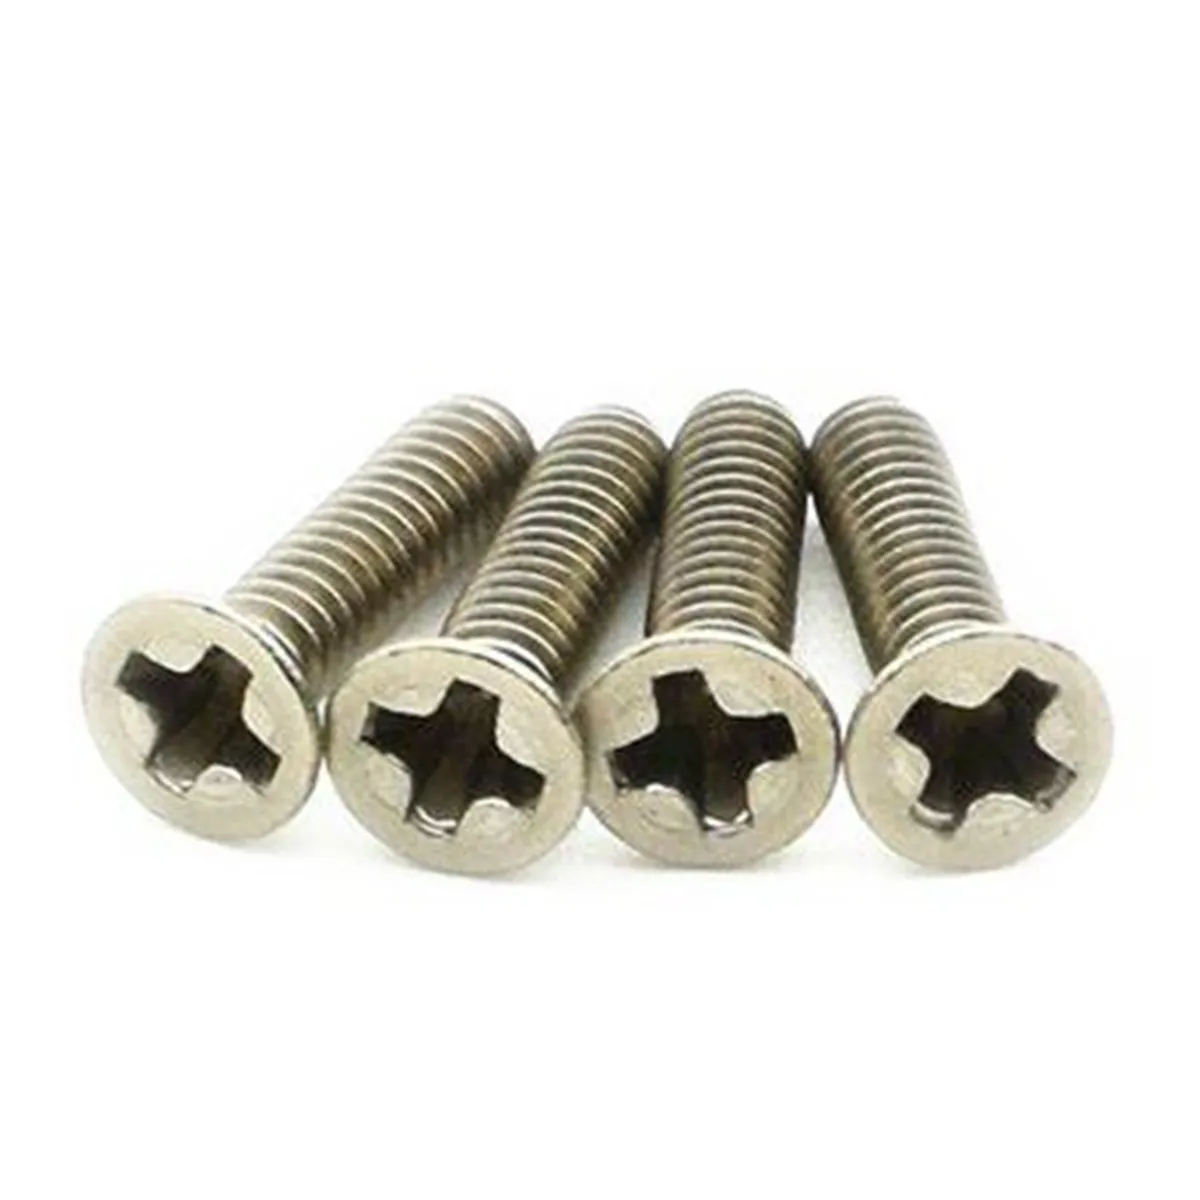 Best Sell M3 Titanium Screws And Bolts For Car